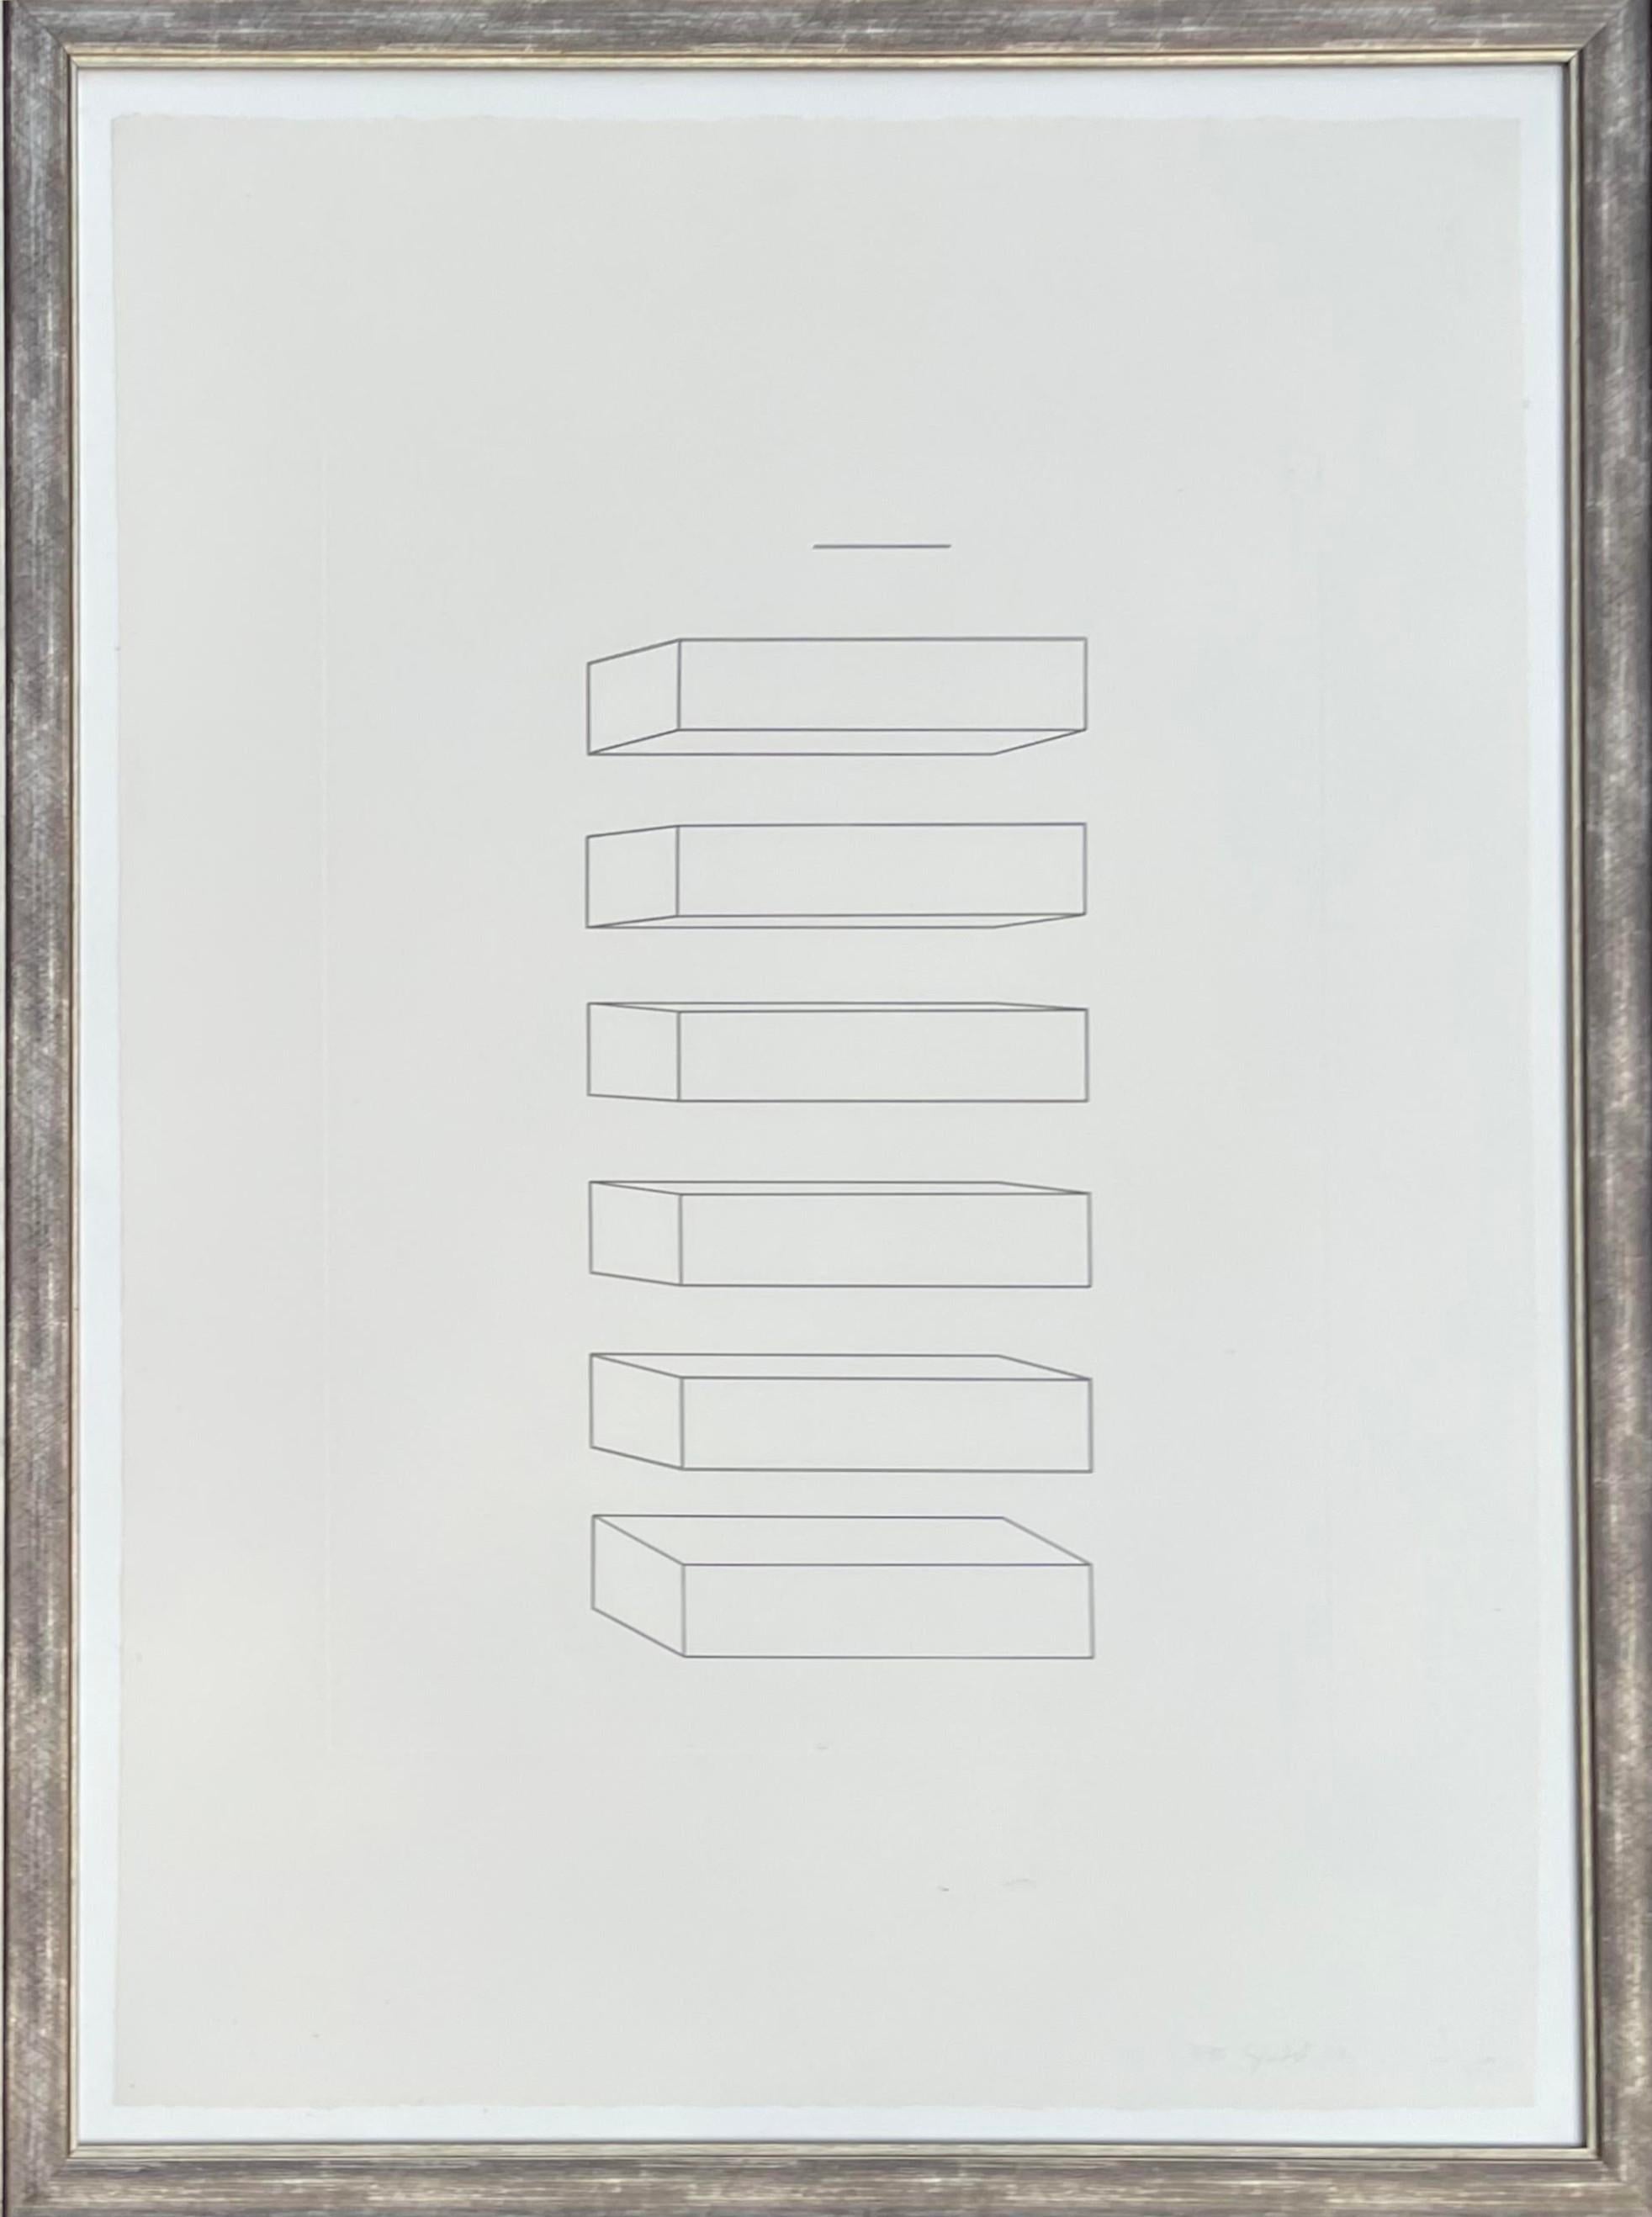 Untitled #77, from an untitled portfolio of six works (Schellmann 82)  - Print by Donald Judd